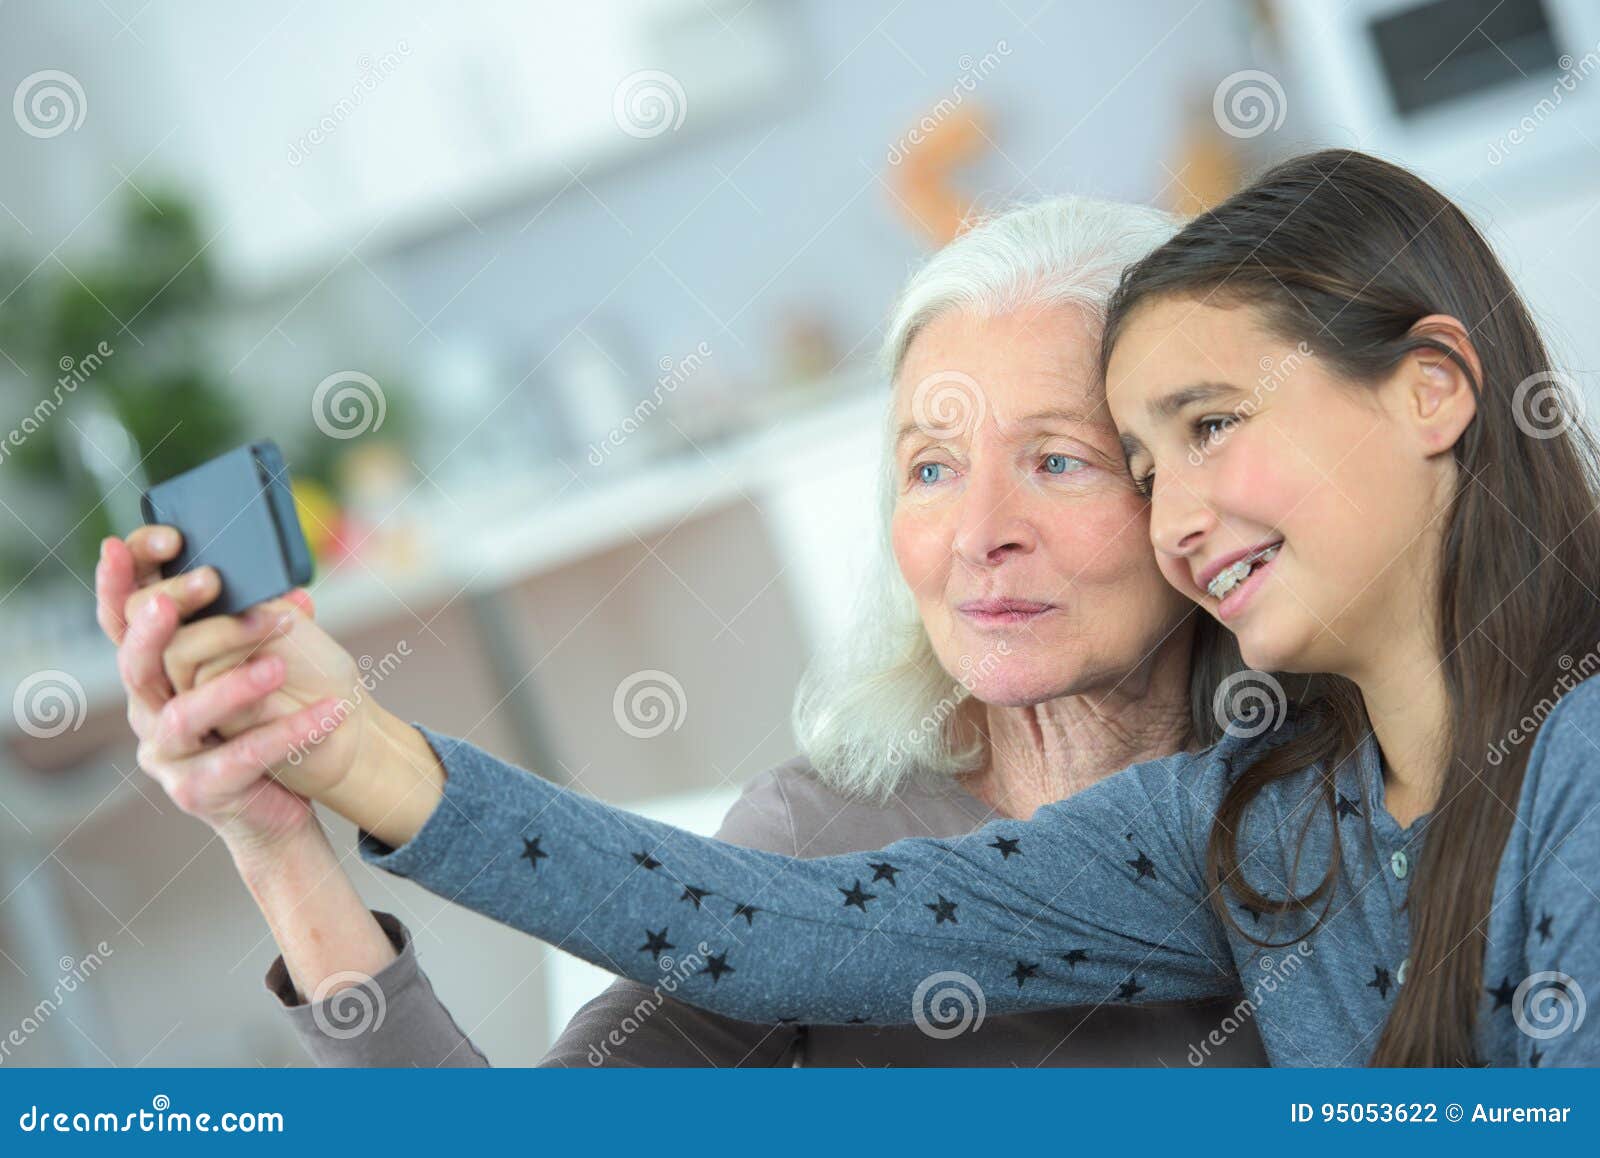 Two Generation Womans Making Funny Selfie Together Stock Photo Image